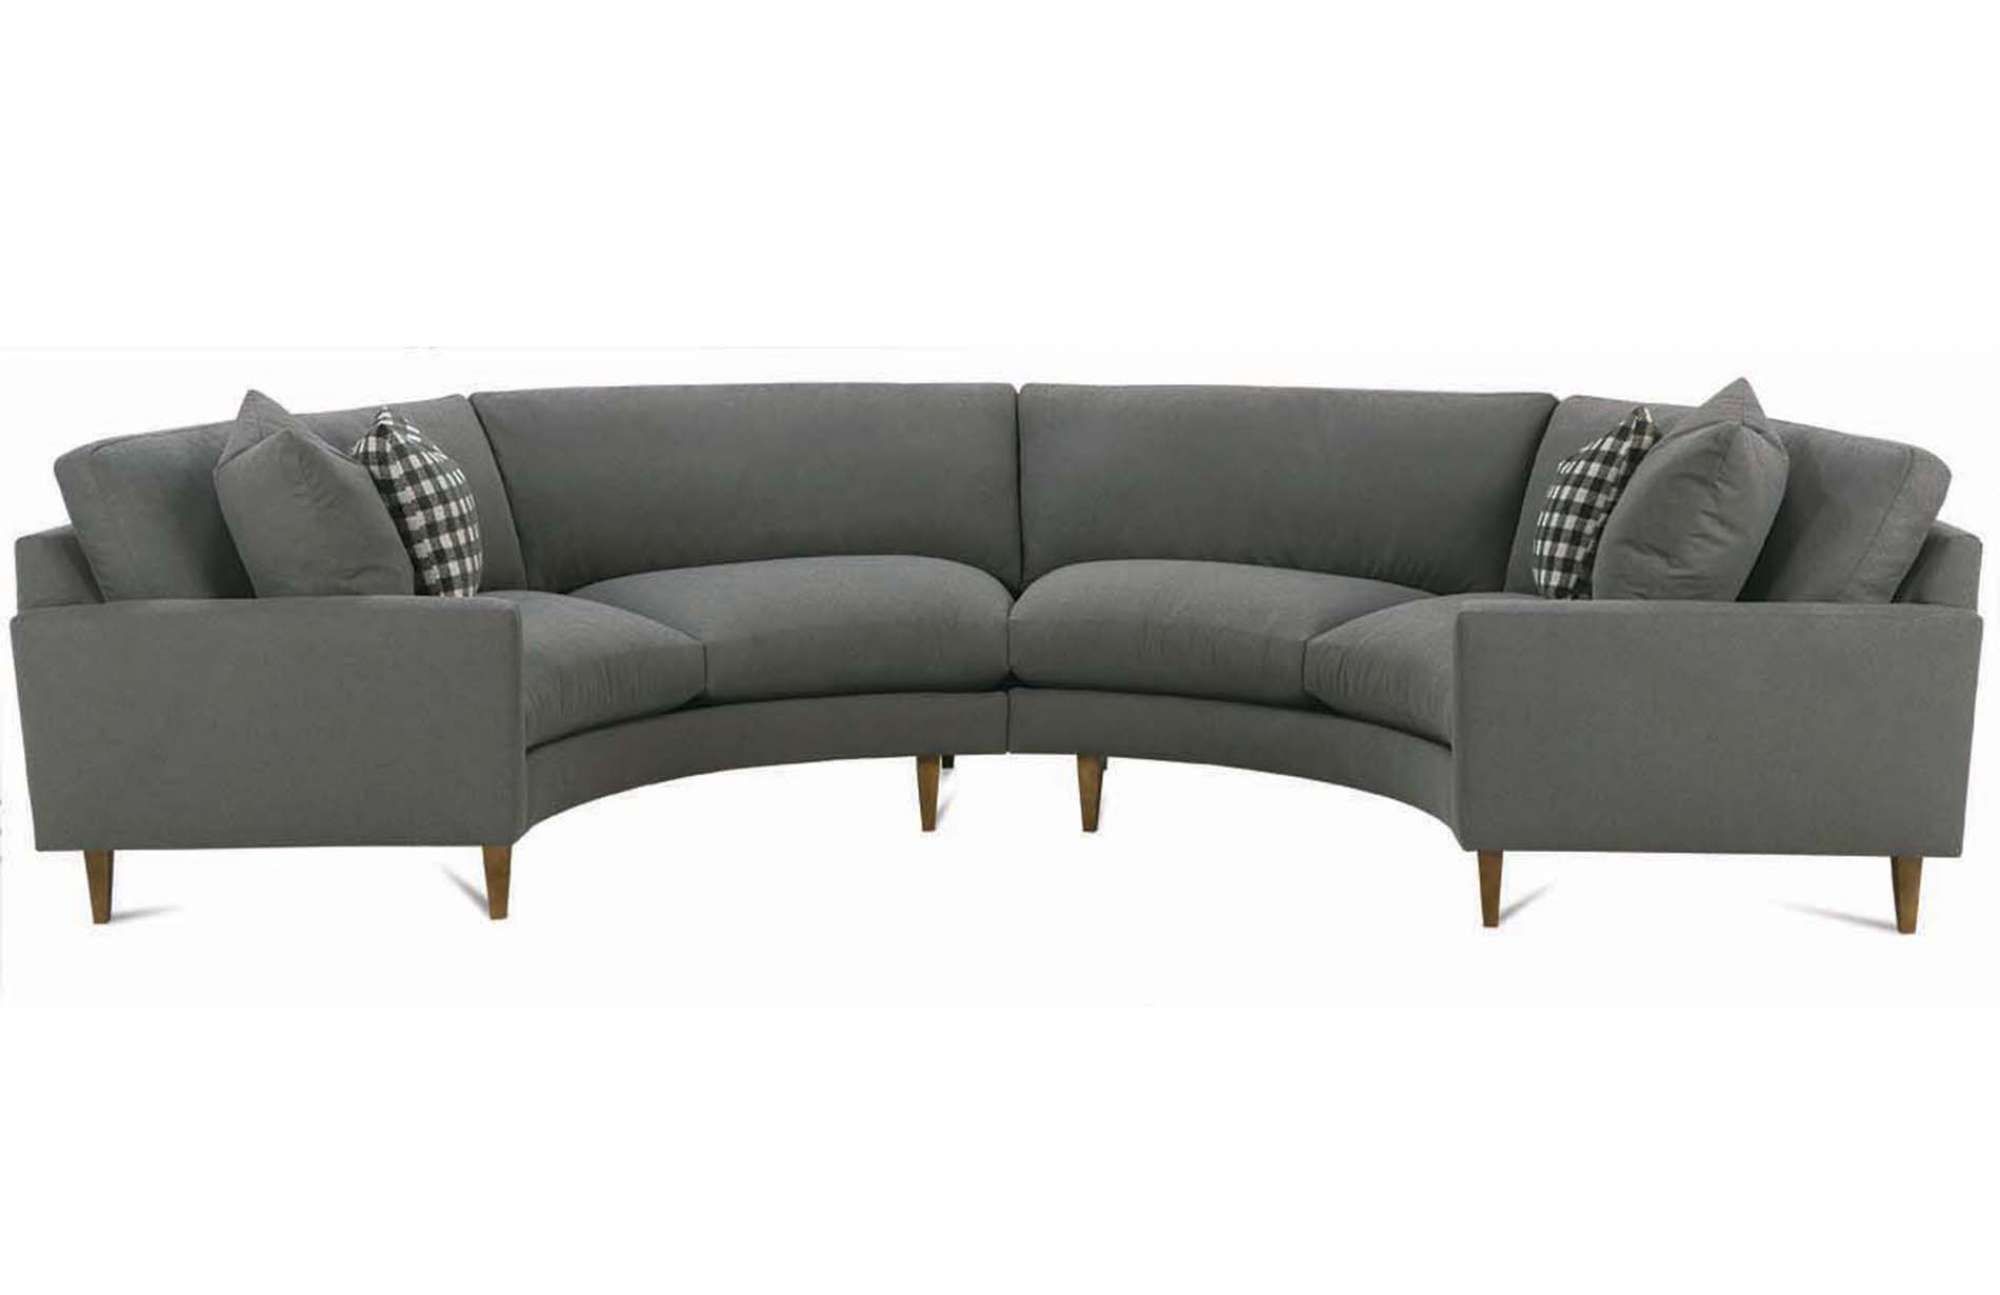 Ripley Curved Sectional – Mobilia Pertaining To 130" Curved Sectionals (View 11 of 20)